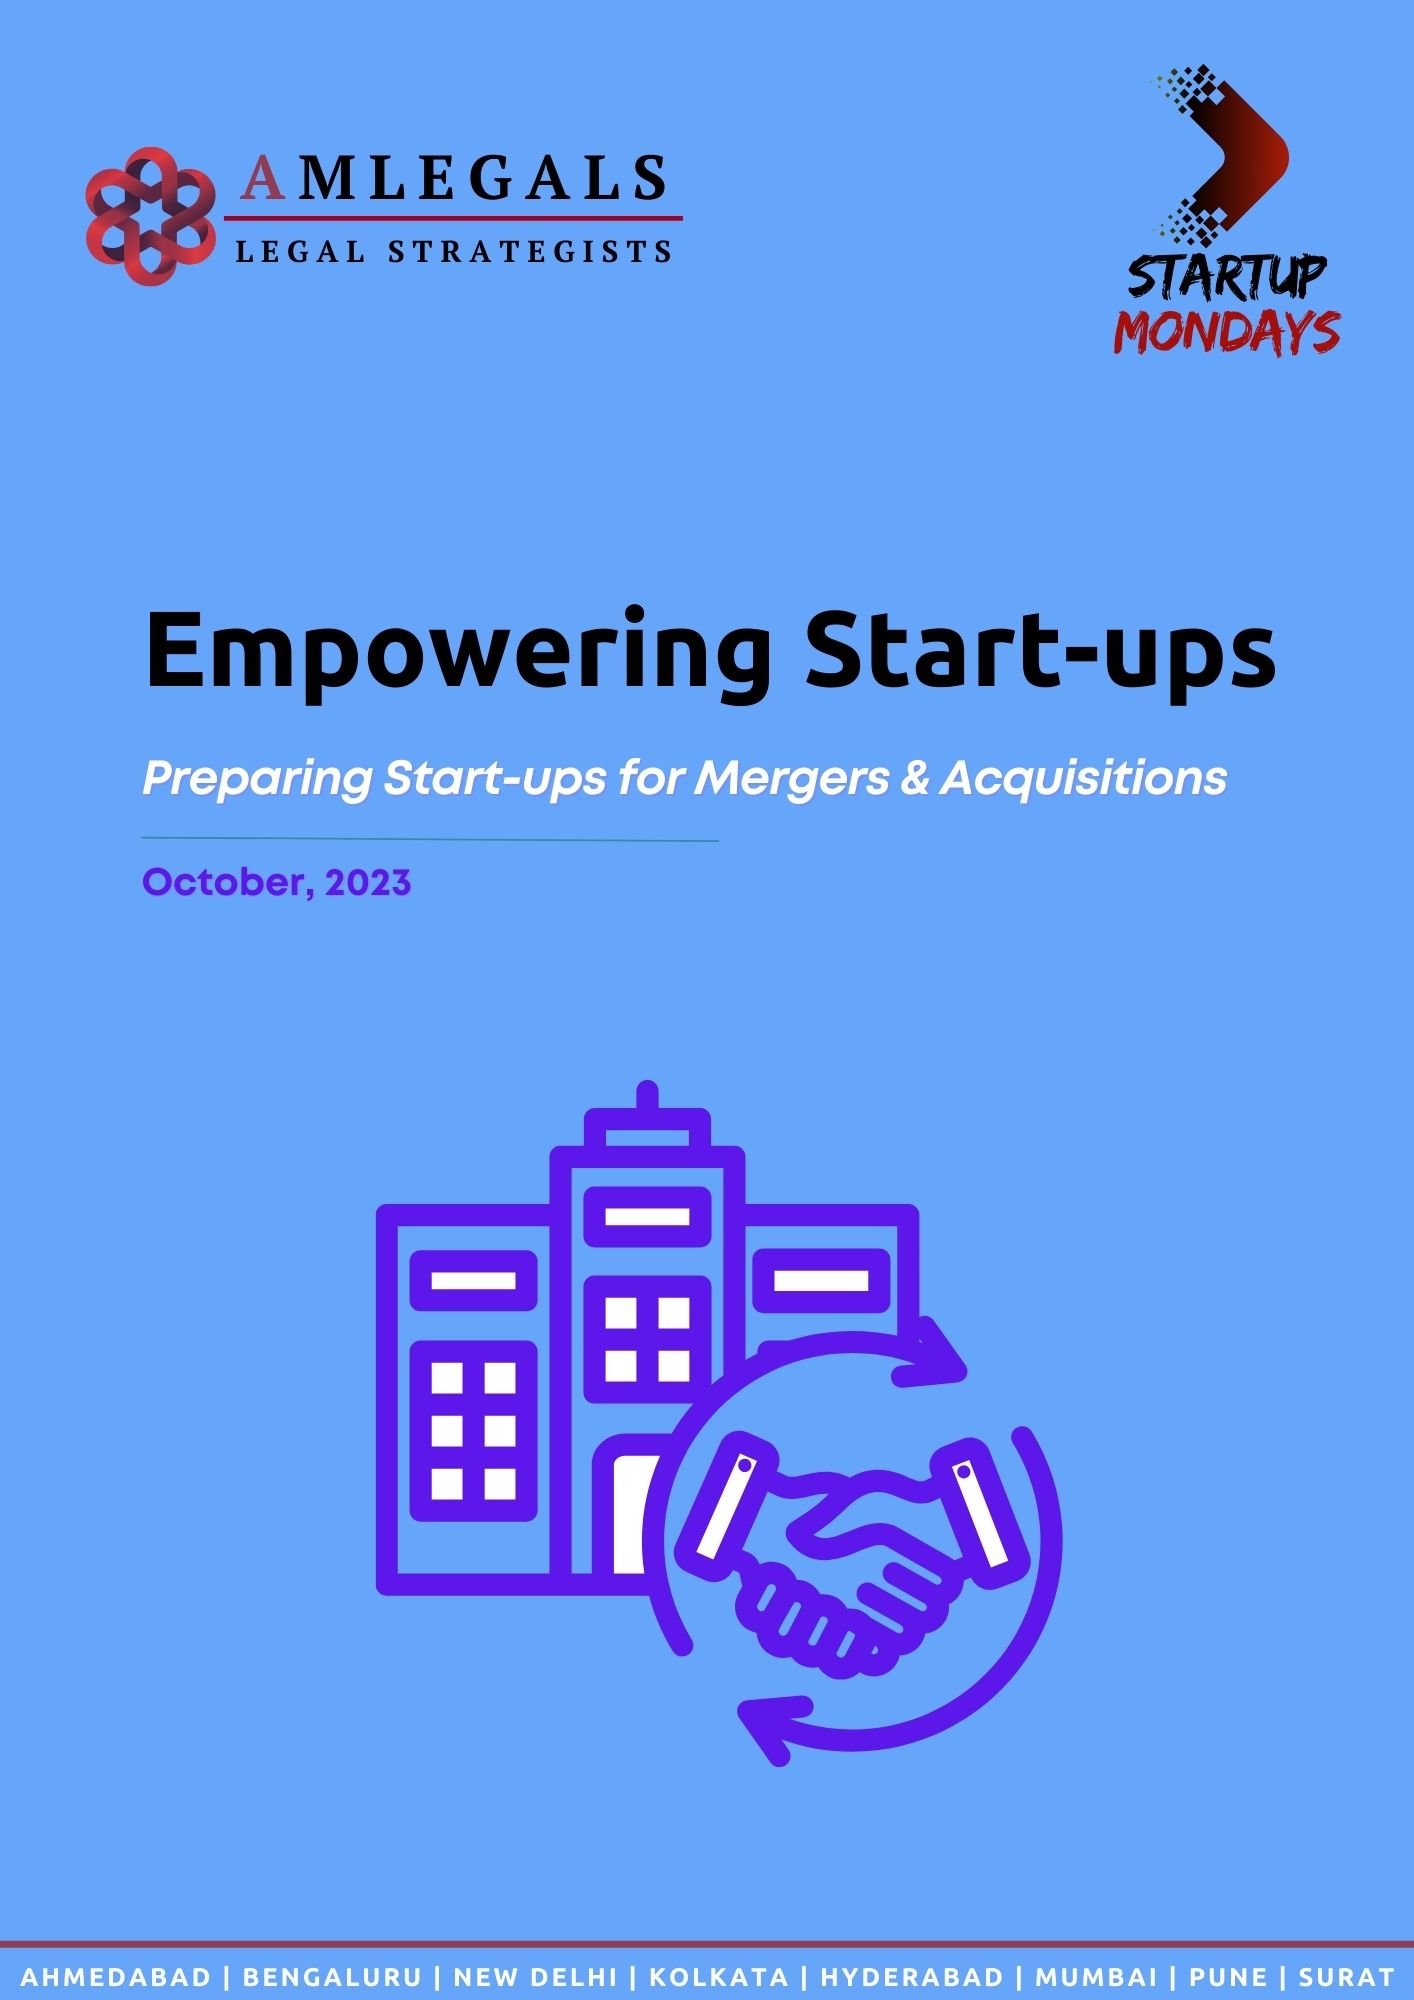 Preparing Start-ups for Mergers & Acquisitions